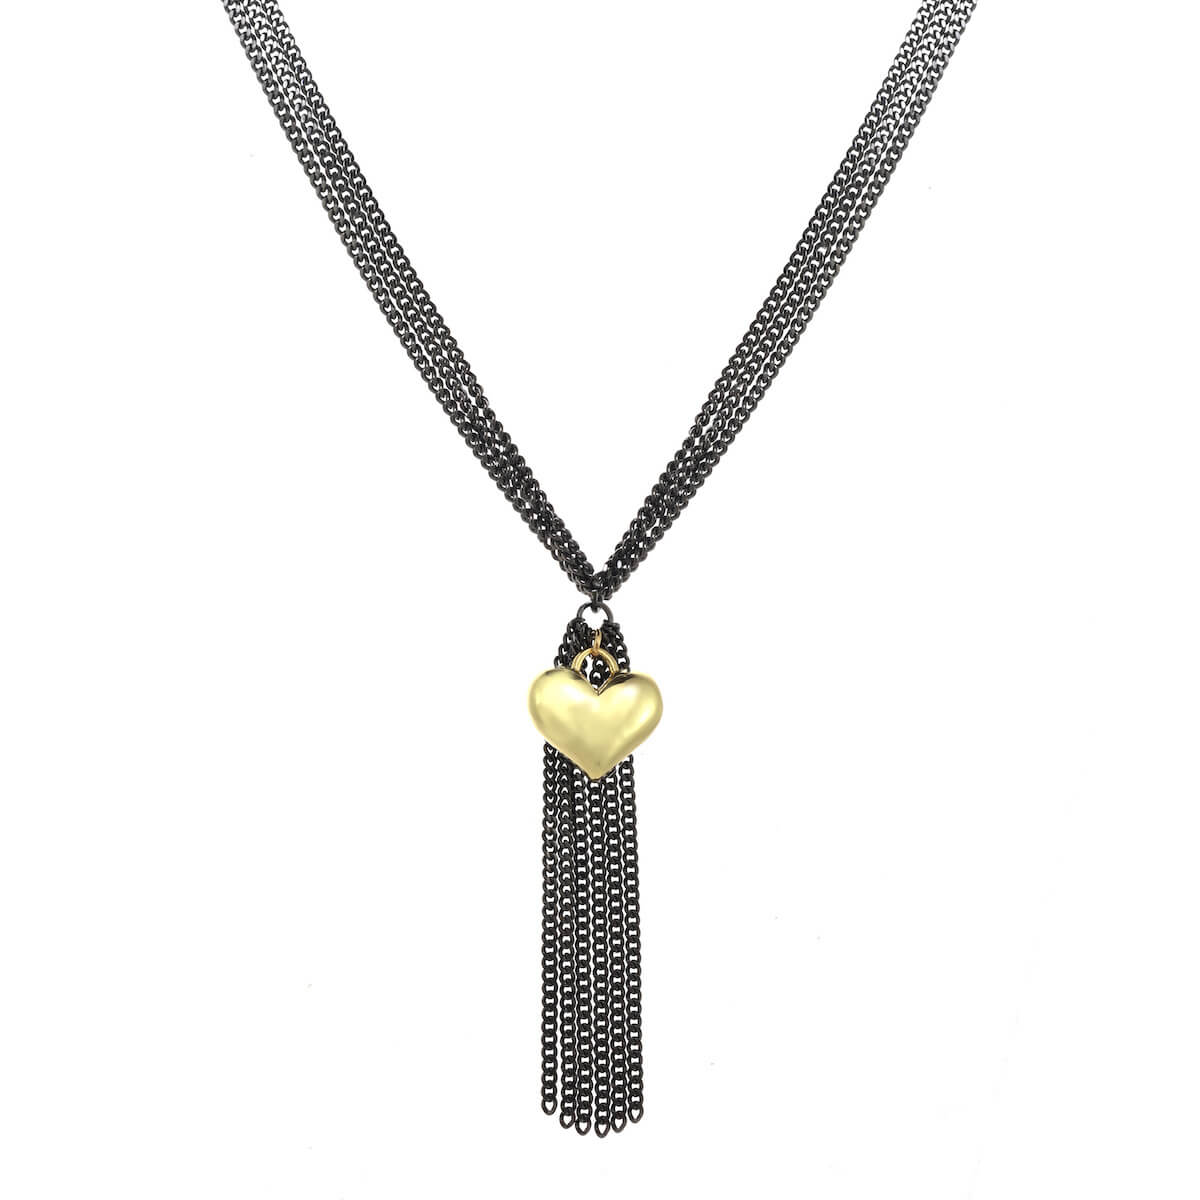 Multi-strand necklace in gunmetal with a gold heart by Rachel Reinhardt Jewelry.